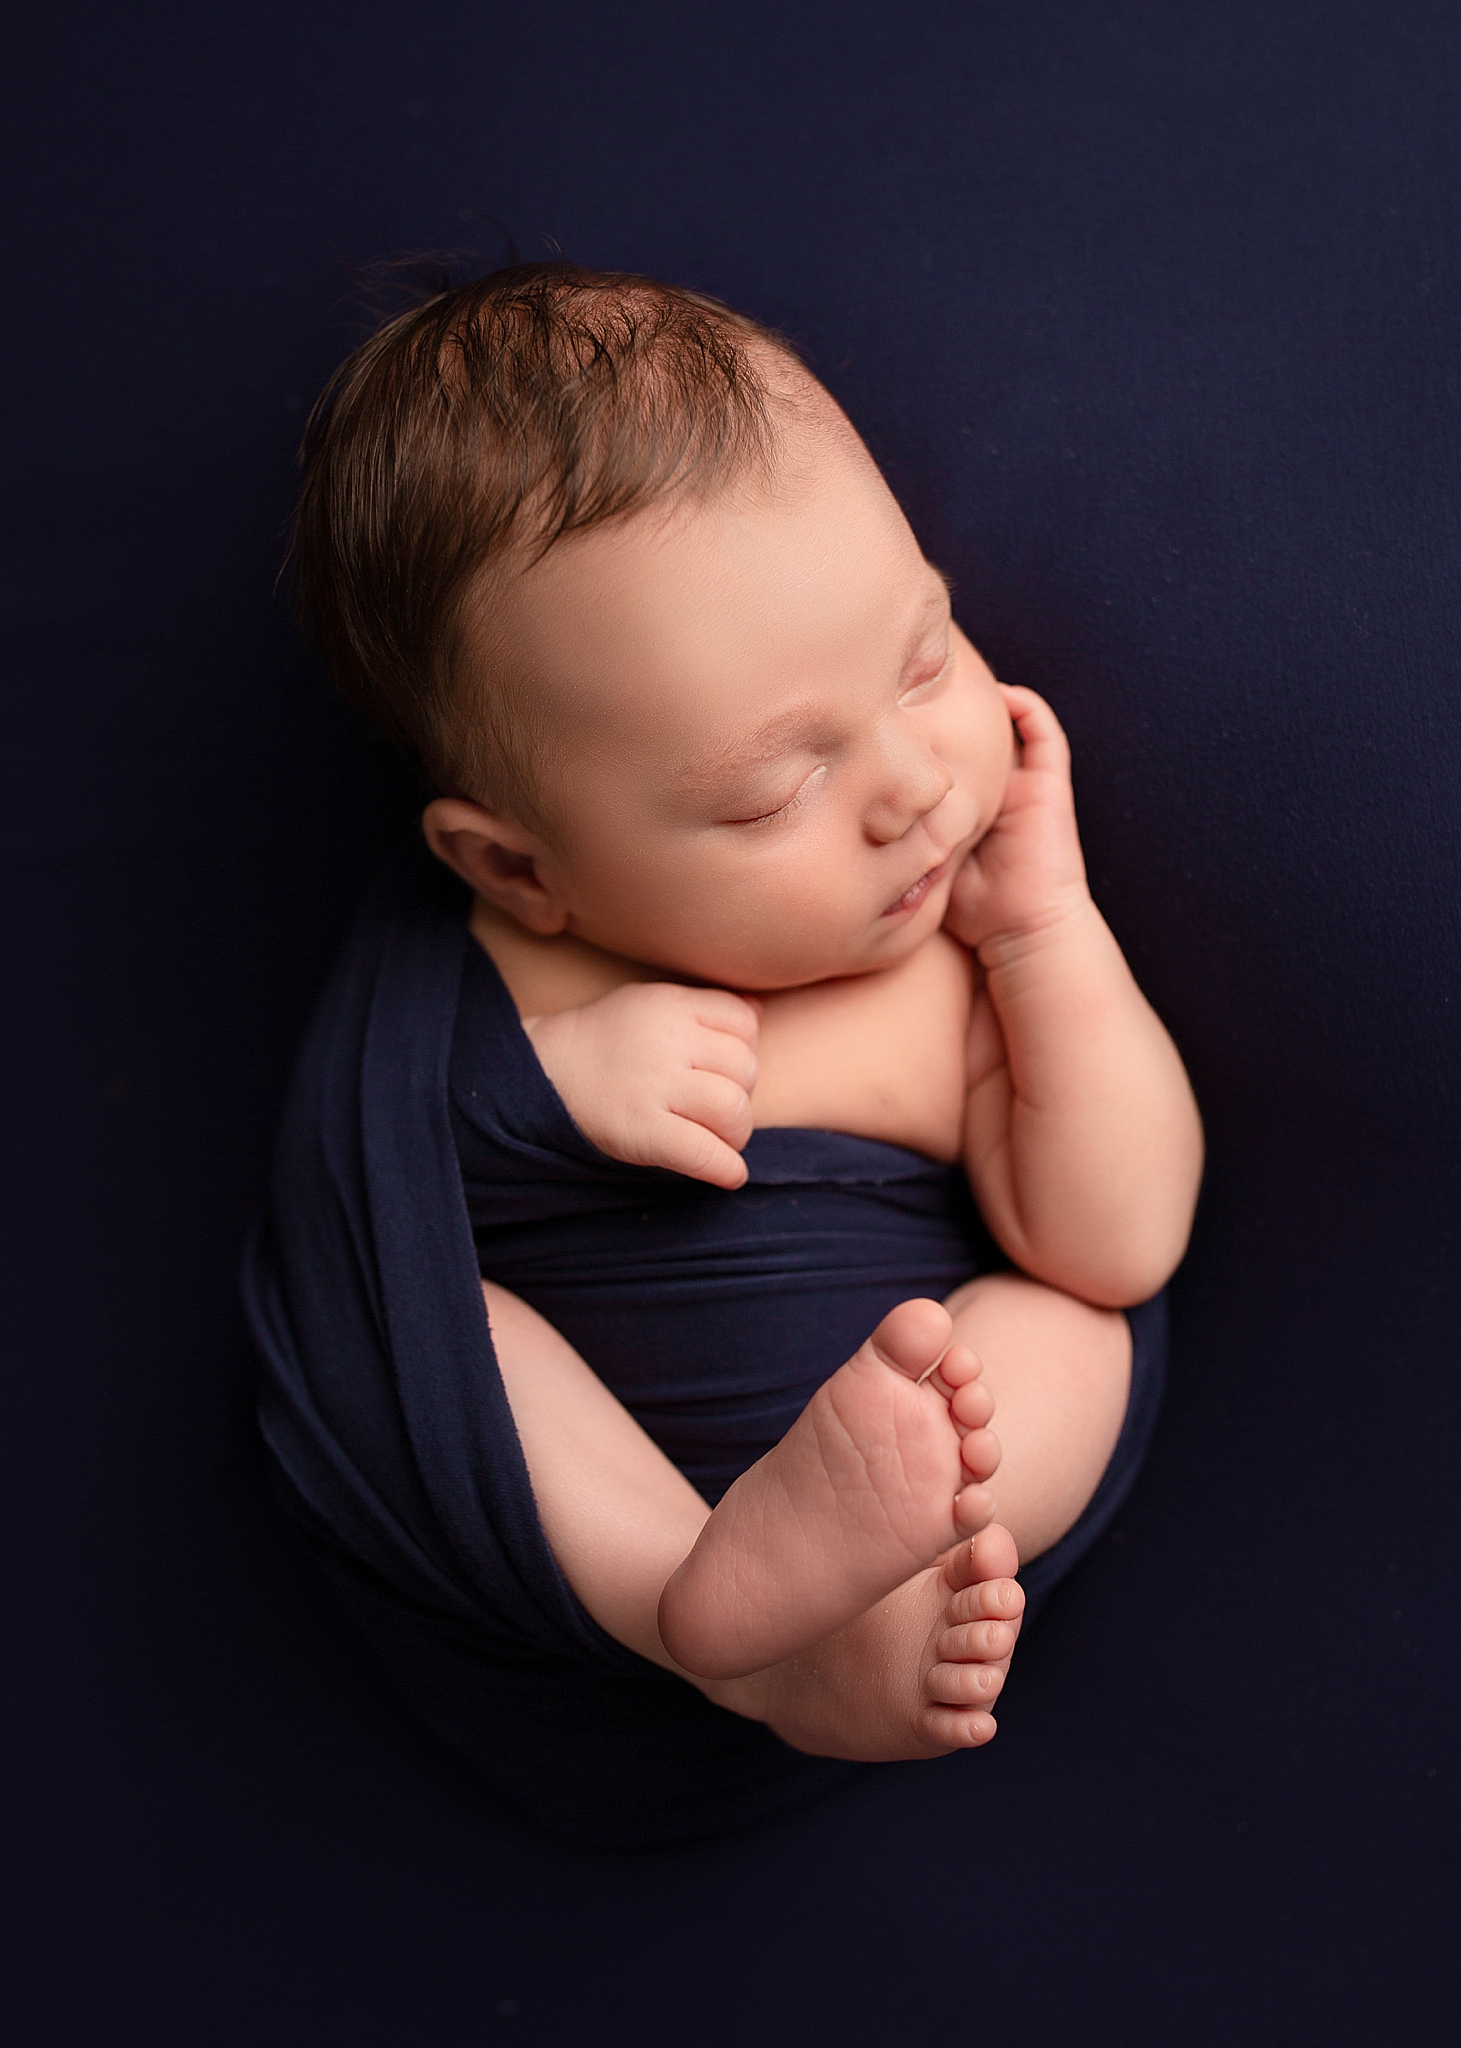 A newborn baby boy is photographed in a wrapped up position on navy blue.